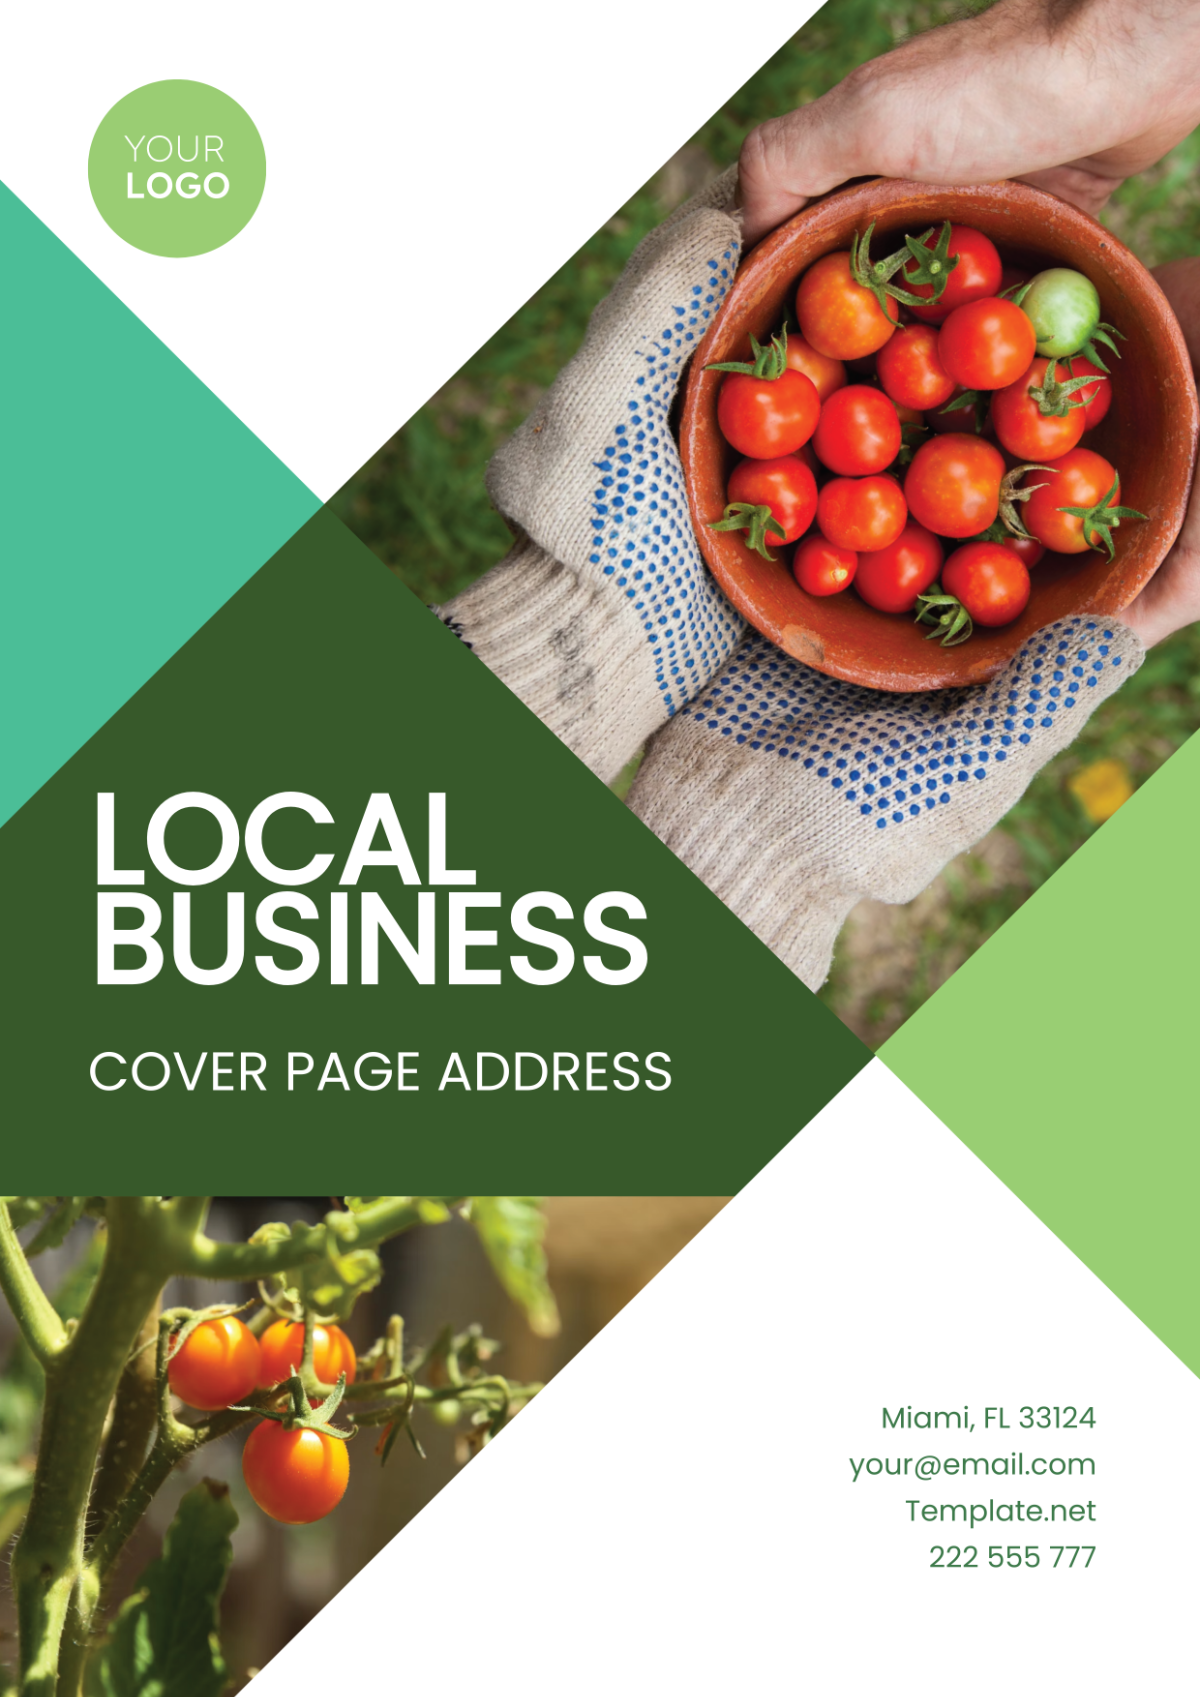 Local Business Cover Page Address